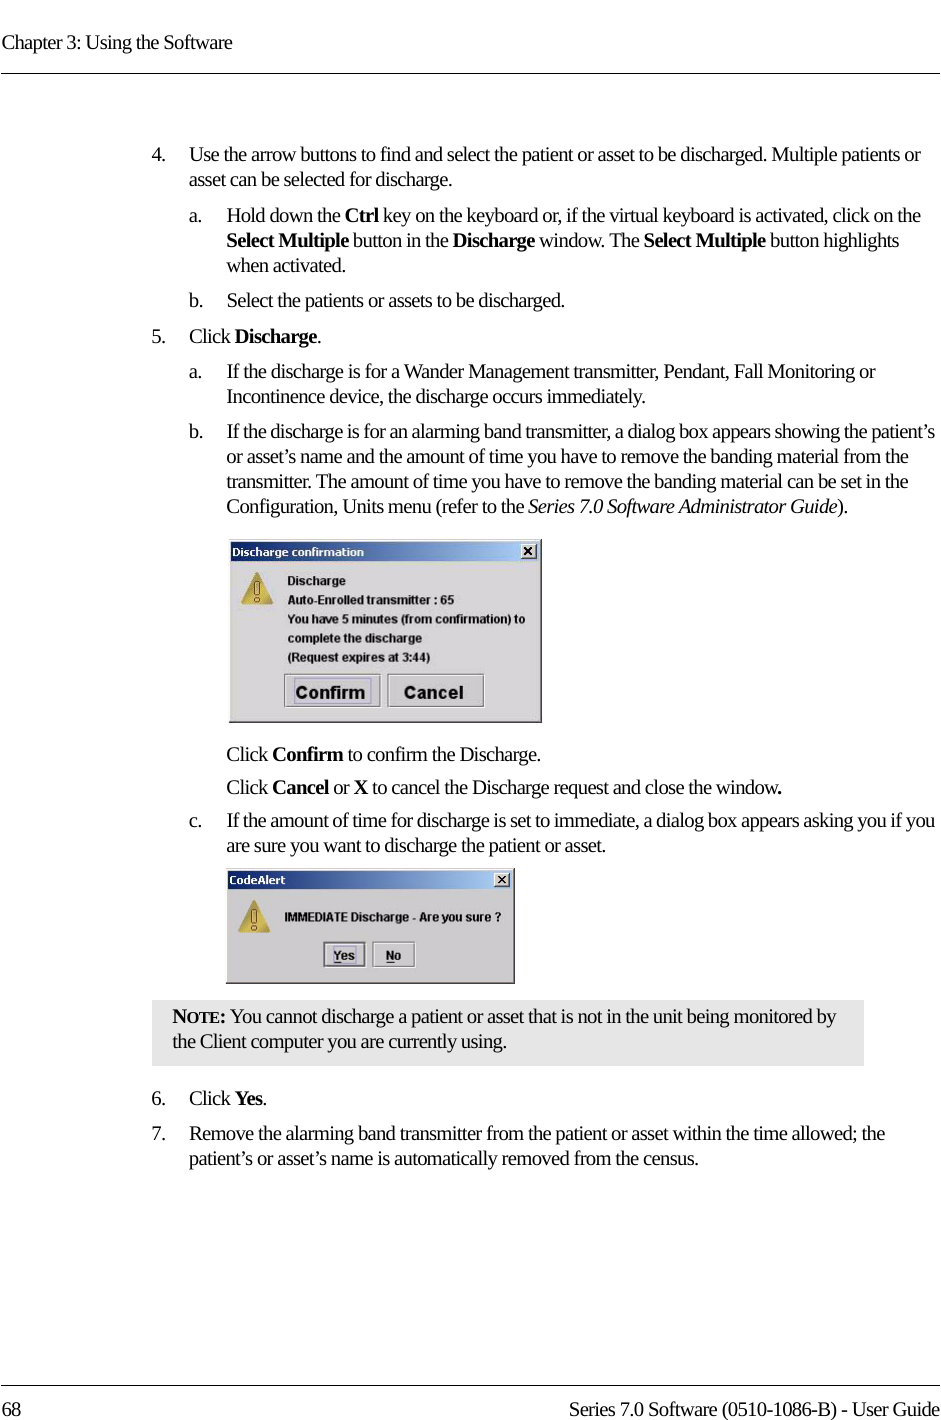 Chapter 3: Using the Software68 Series 7.0 Software (0510-1086-B) - User Guide4.    Use the arrow buttons to find and select the patient or asset to be discharged. Multiple patients or asset can be selected for discharge. a.    Hold down the Ctrl key on the keyboard or, if the virtual keyboard is activated, click on the Select Multiple button in the Discharge window. The Select Multiple button highlights when activated.b.    Select the patients or assets to be discharged.5.    Click Discharge.a.    If the discharge is for a Wander Management transmitter, Pendant, Fall Monitoring or Incontinence device, the discharge occurs immediately.b.    If the discharge is for an alarming band transmitter, a dialog box appears showing the patient’s or asset’s name and the amount of time you have to remove the banding material from the transmitter. The amount of time you have to remove the banding material can be set in the Configuration, Units menu (refer to the Series 7.0 Software Administrator Guide).Click Confirm to confirm the Discharge.Click Cancel or X to cancel the Discharge request and close the window.c.    If the amount of time for discharge is set to immediate, a dialog box appears asking you if you are sure you want to discharge the patient or asset.6.    Click Yes.7.    Remove the alarming band transmitter from the patient or asset within the time allowed; the patient’s or asset’s name is automatically removed from the census. NOTE: You cannot discharge a patient or asset that is not in the unit being monitored by the Client computer you are currently using. 